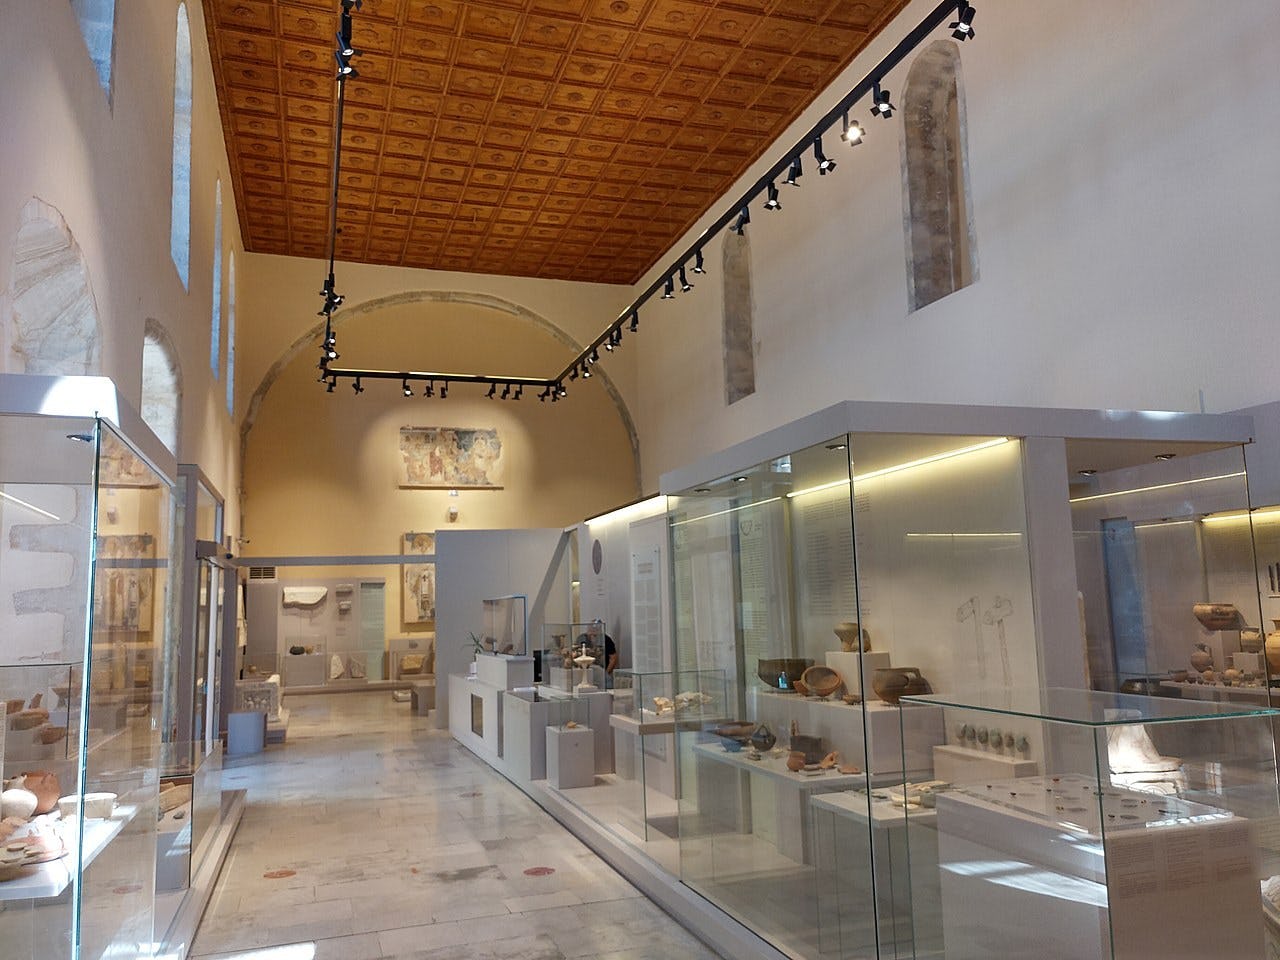 The Archaeological Museum of Rethymno